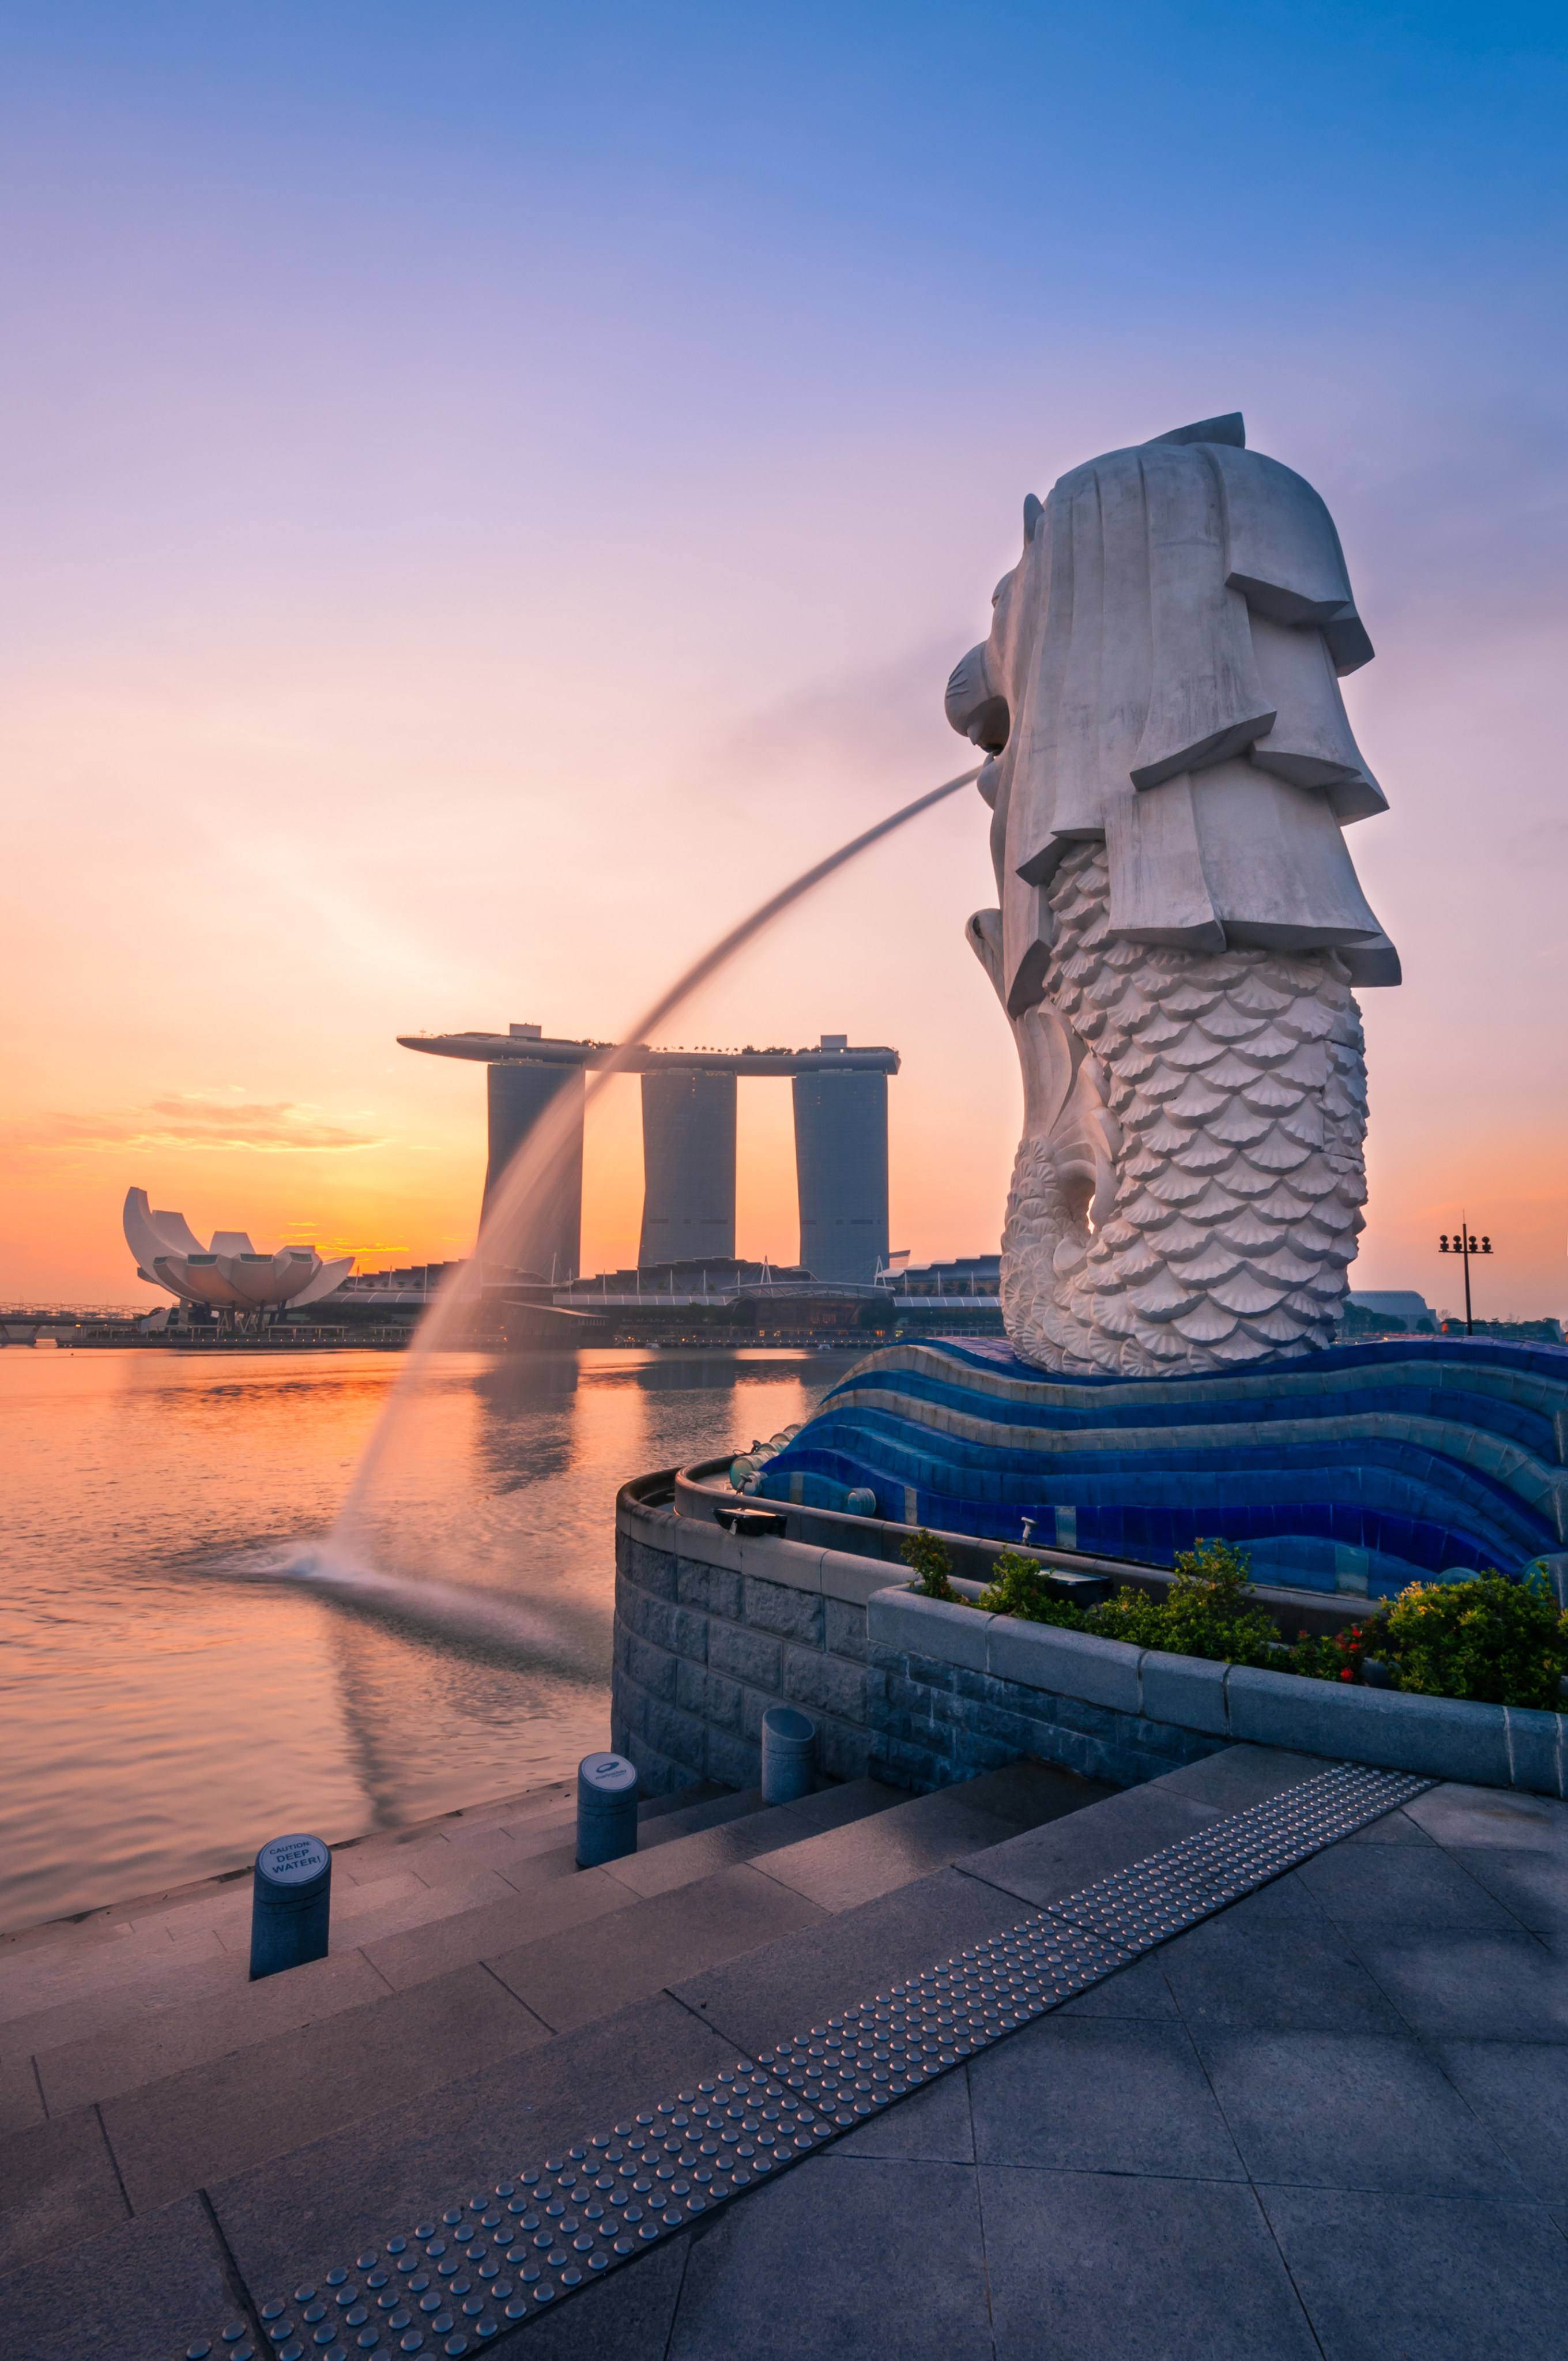 The Merlion fountain and Marina Bay in Singapore. Photo: Shutterstock